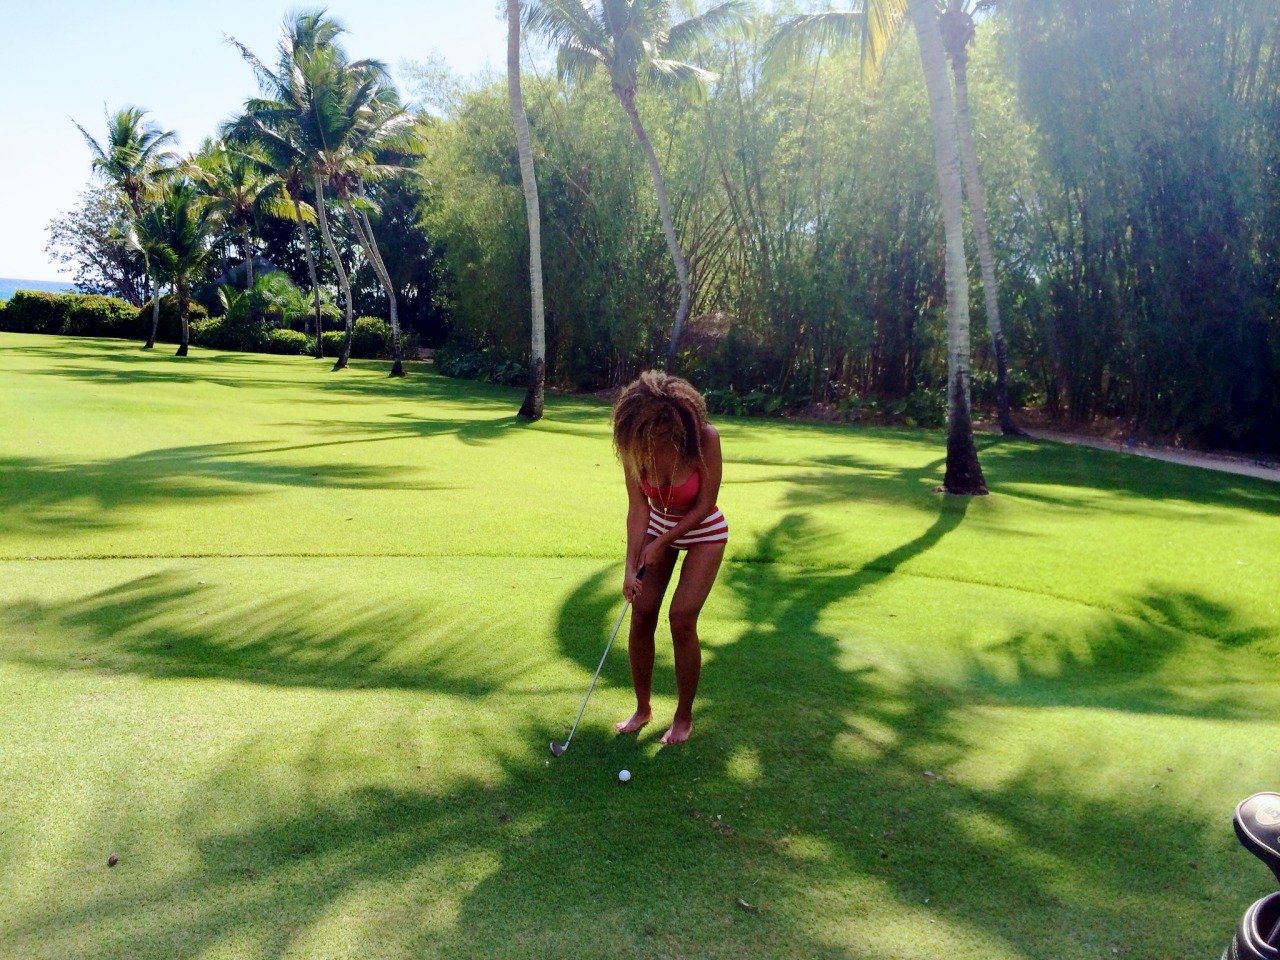 Beyonce first alleged thigh-gap Photoshopped image